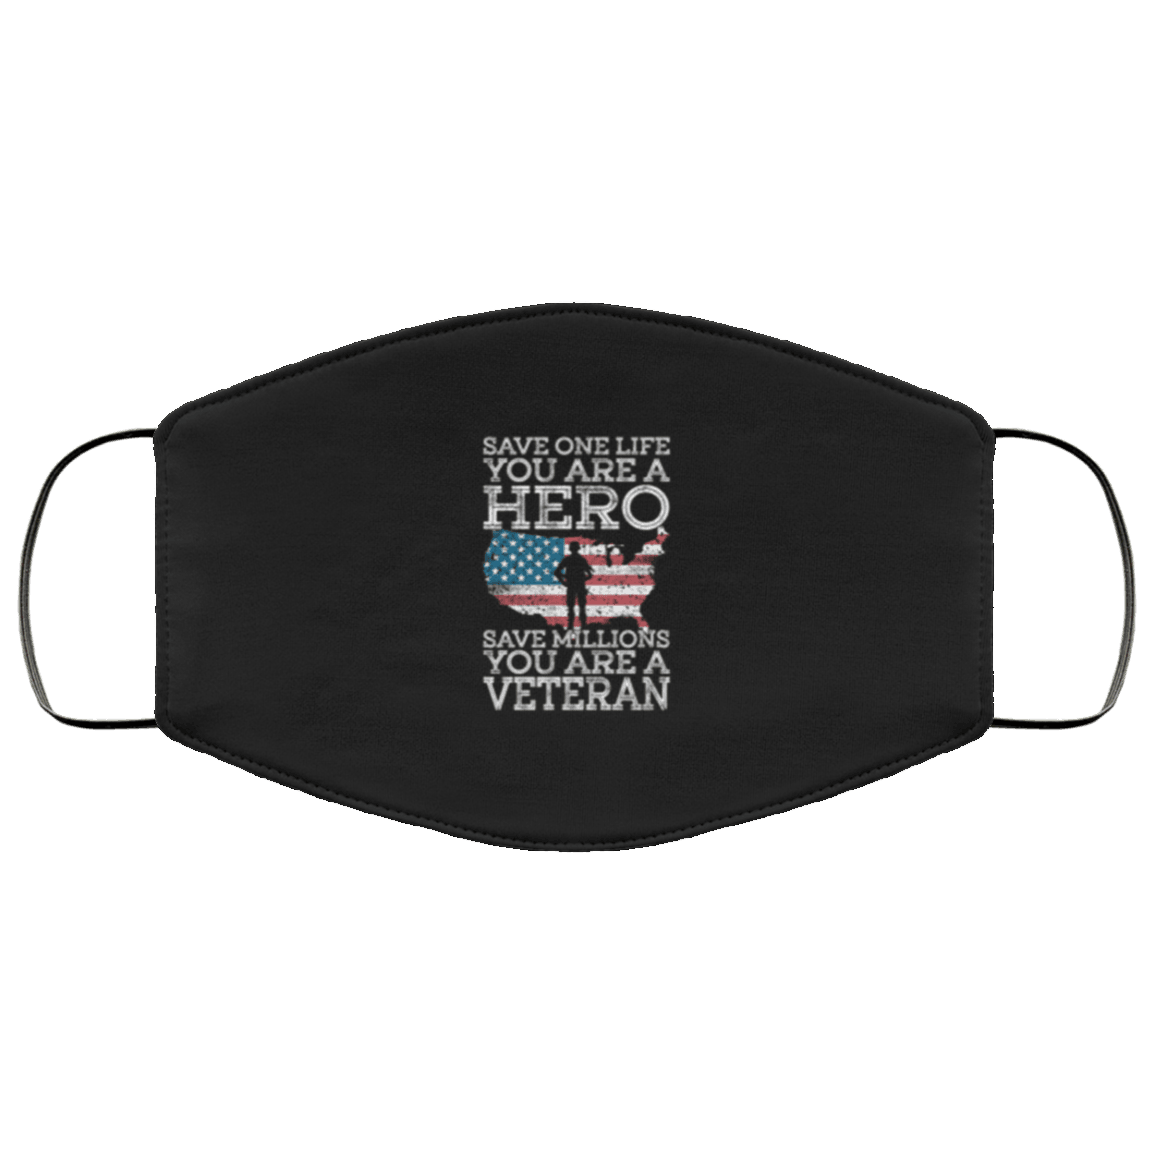 Designs by MyUtopia Shout Out:Hero Save One Life Veteran Save Millions Adult Fabric Face Mask with Elastic Ear Loops,3 Layer Fabric Face Mask / Black / Adult,Fabric Face Mask